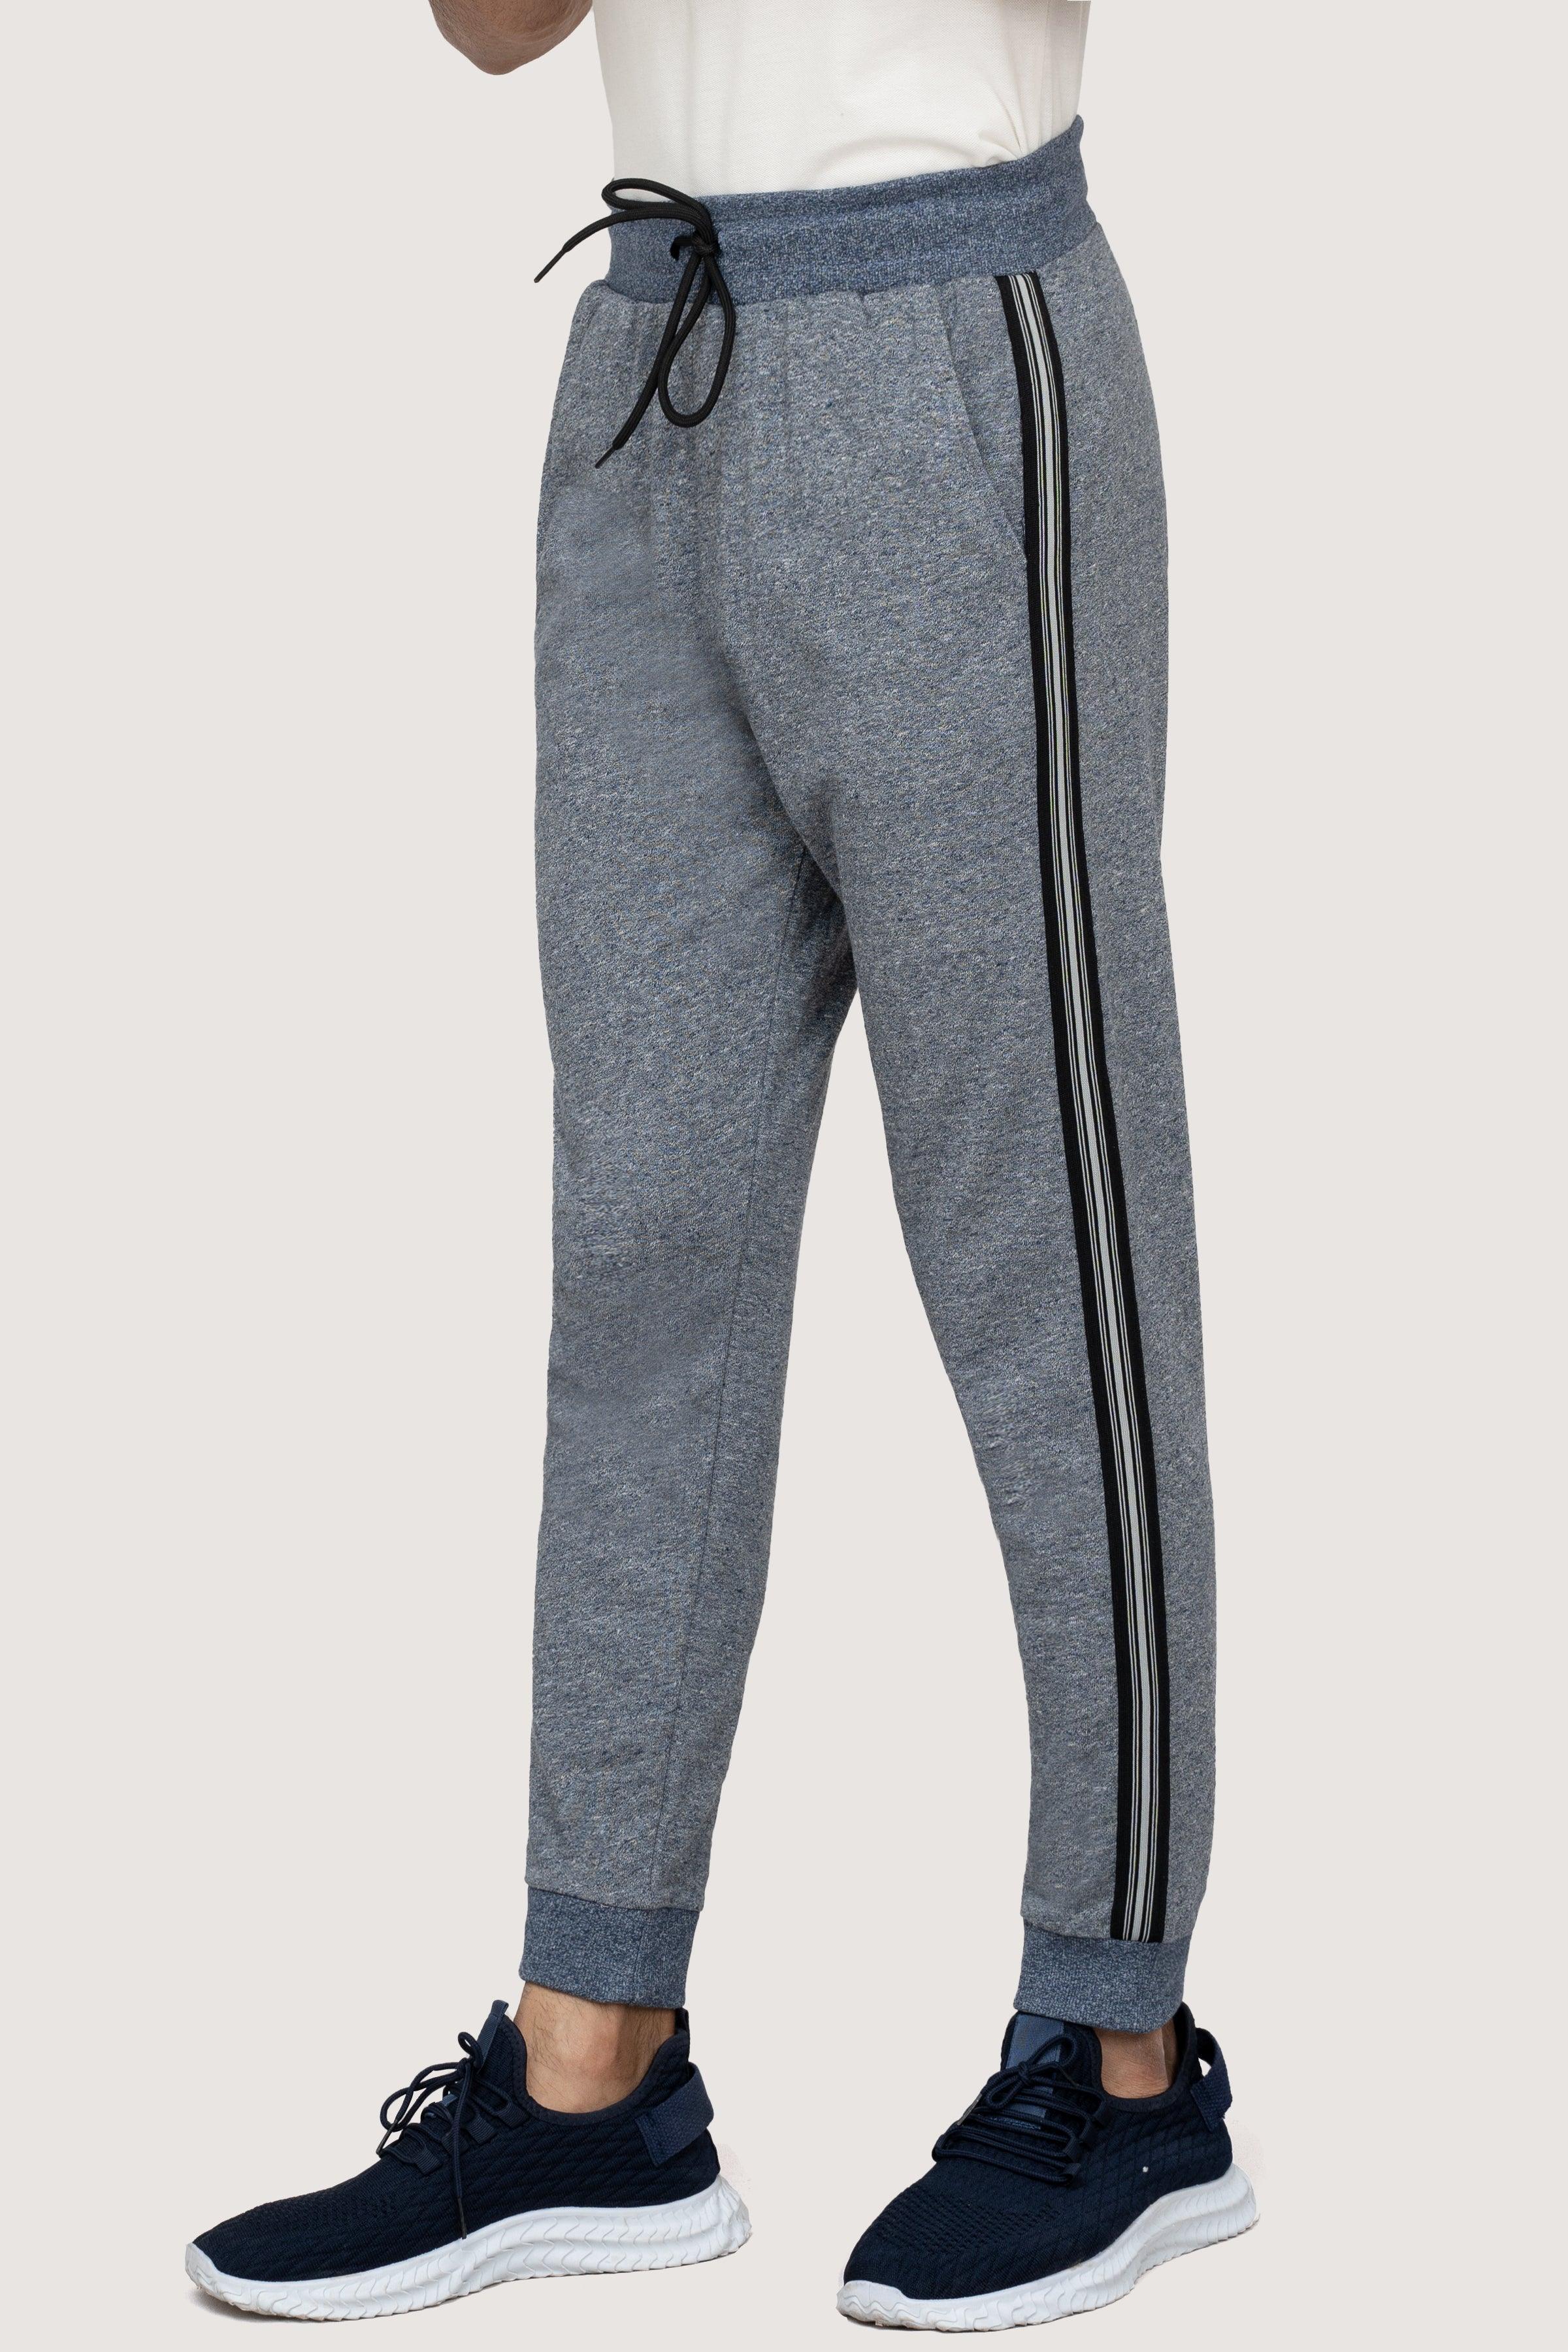 CHAIN YARN SLIMFIT JOGGER TROUSER NAVY MELANGE at Charcoal Clothing